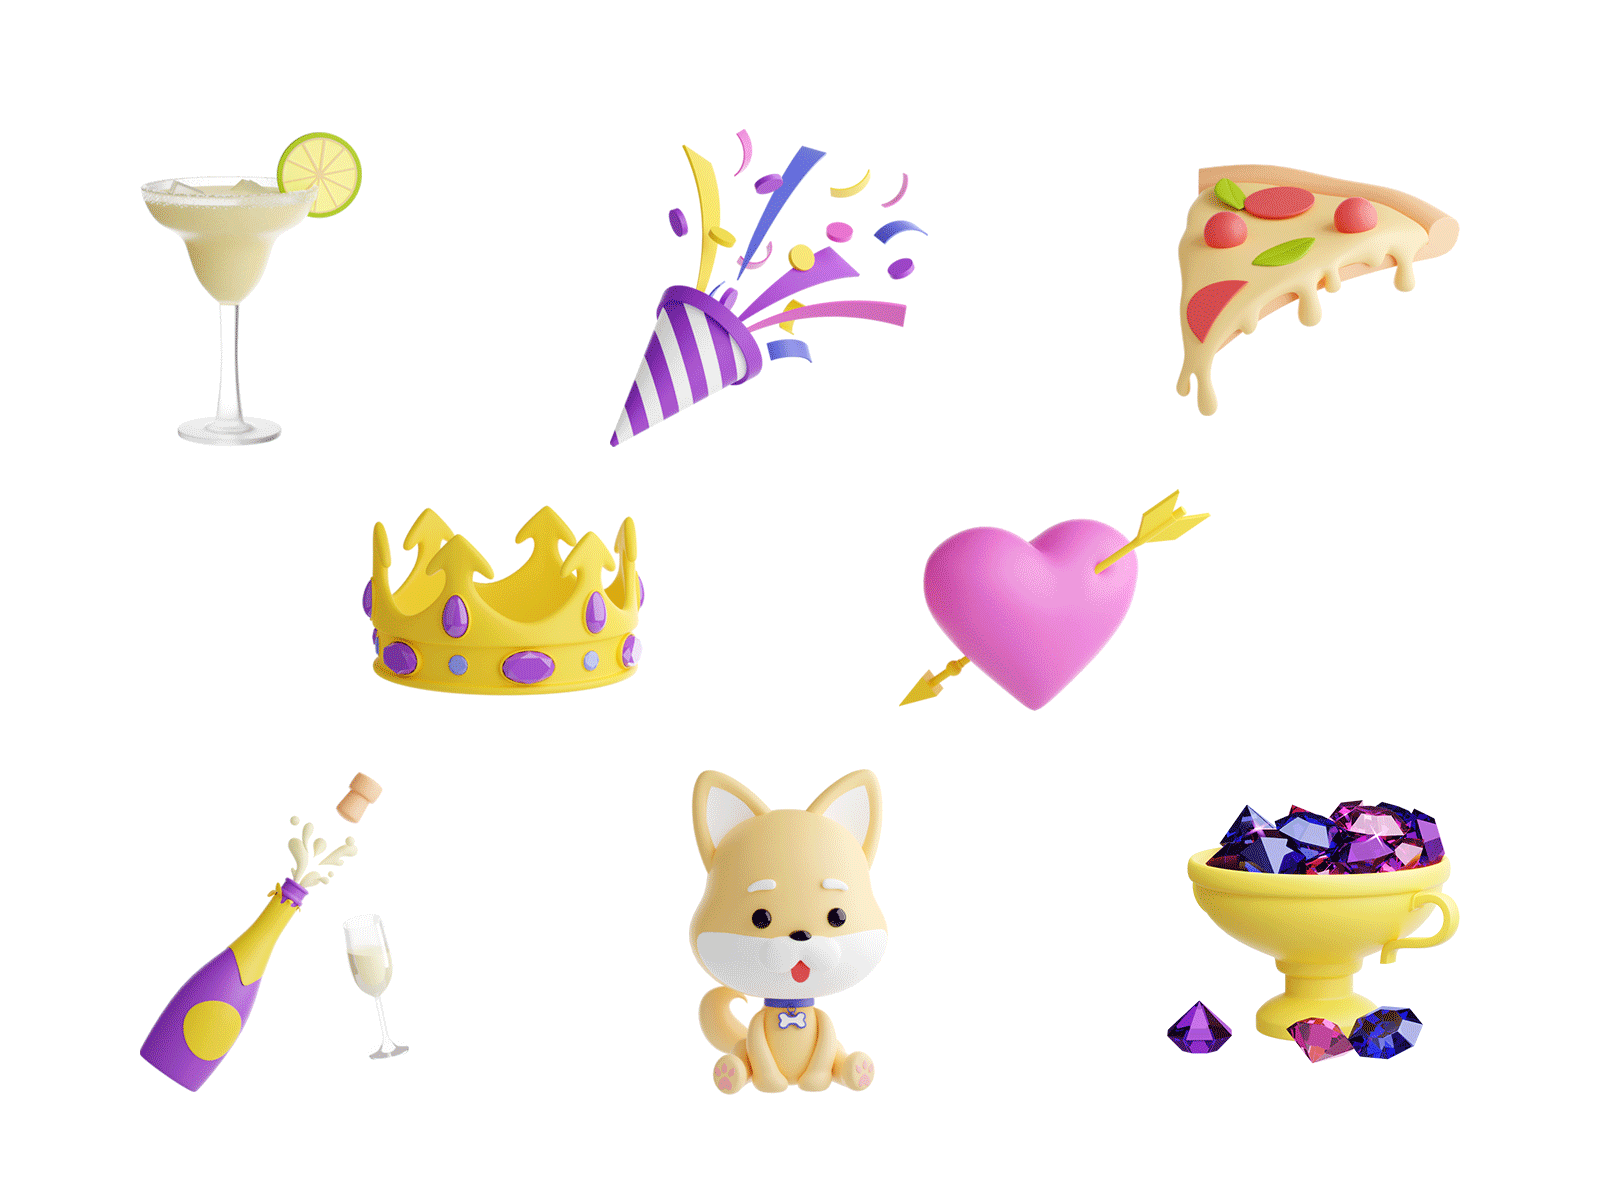 3D illustrations: Gifts collection Vol.2 3d 3d art arrow birthday blender champagne clapper confetti crown cycles design diamonds graphic design heart icon illustration martini party pizza puppy